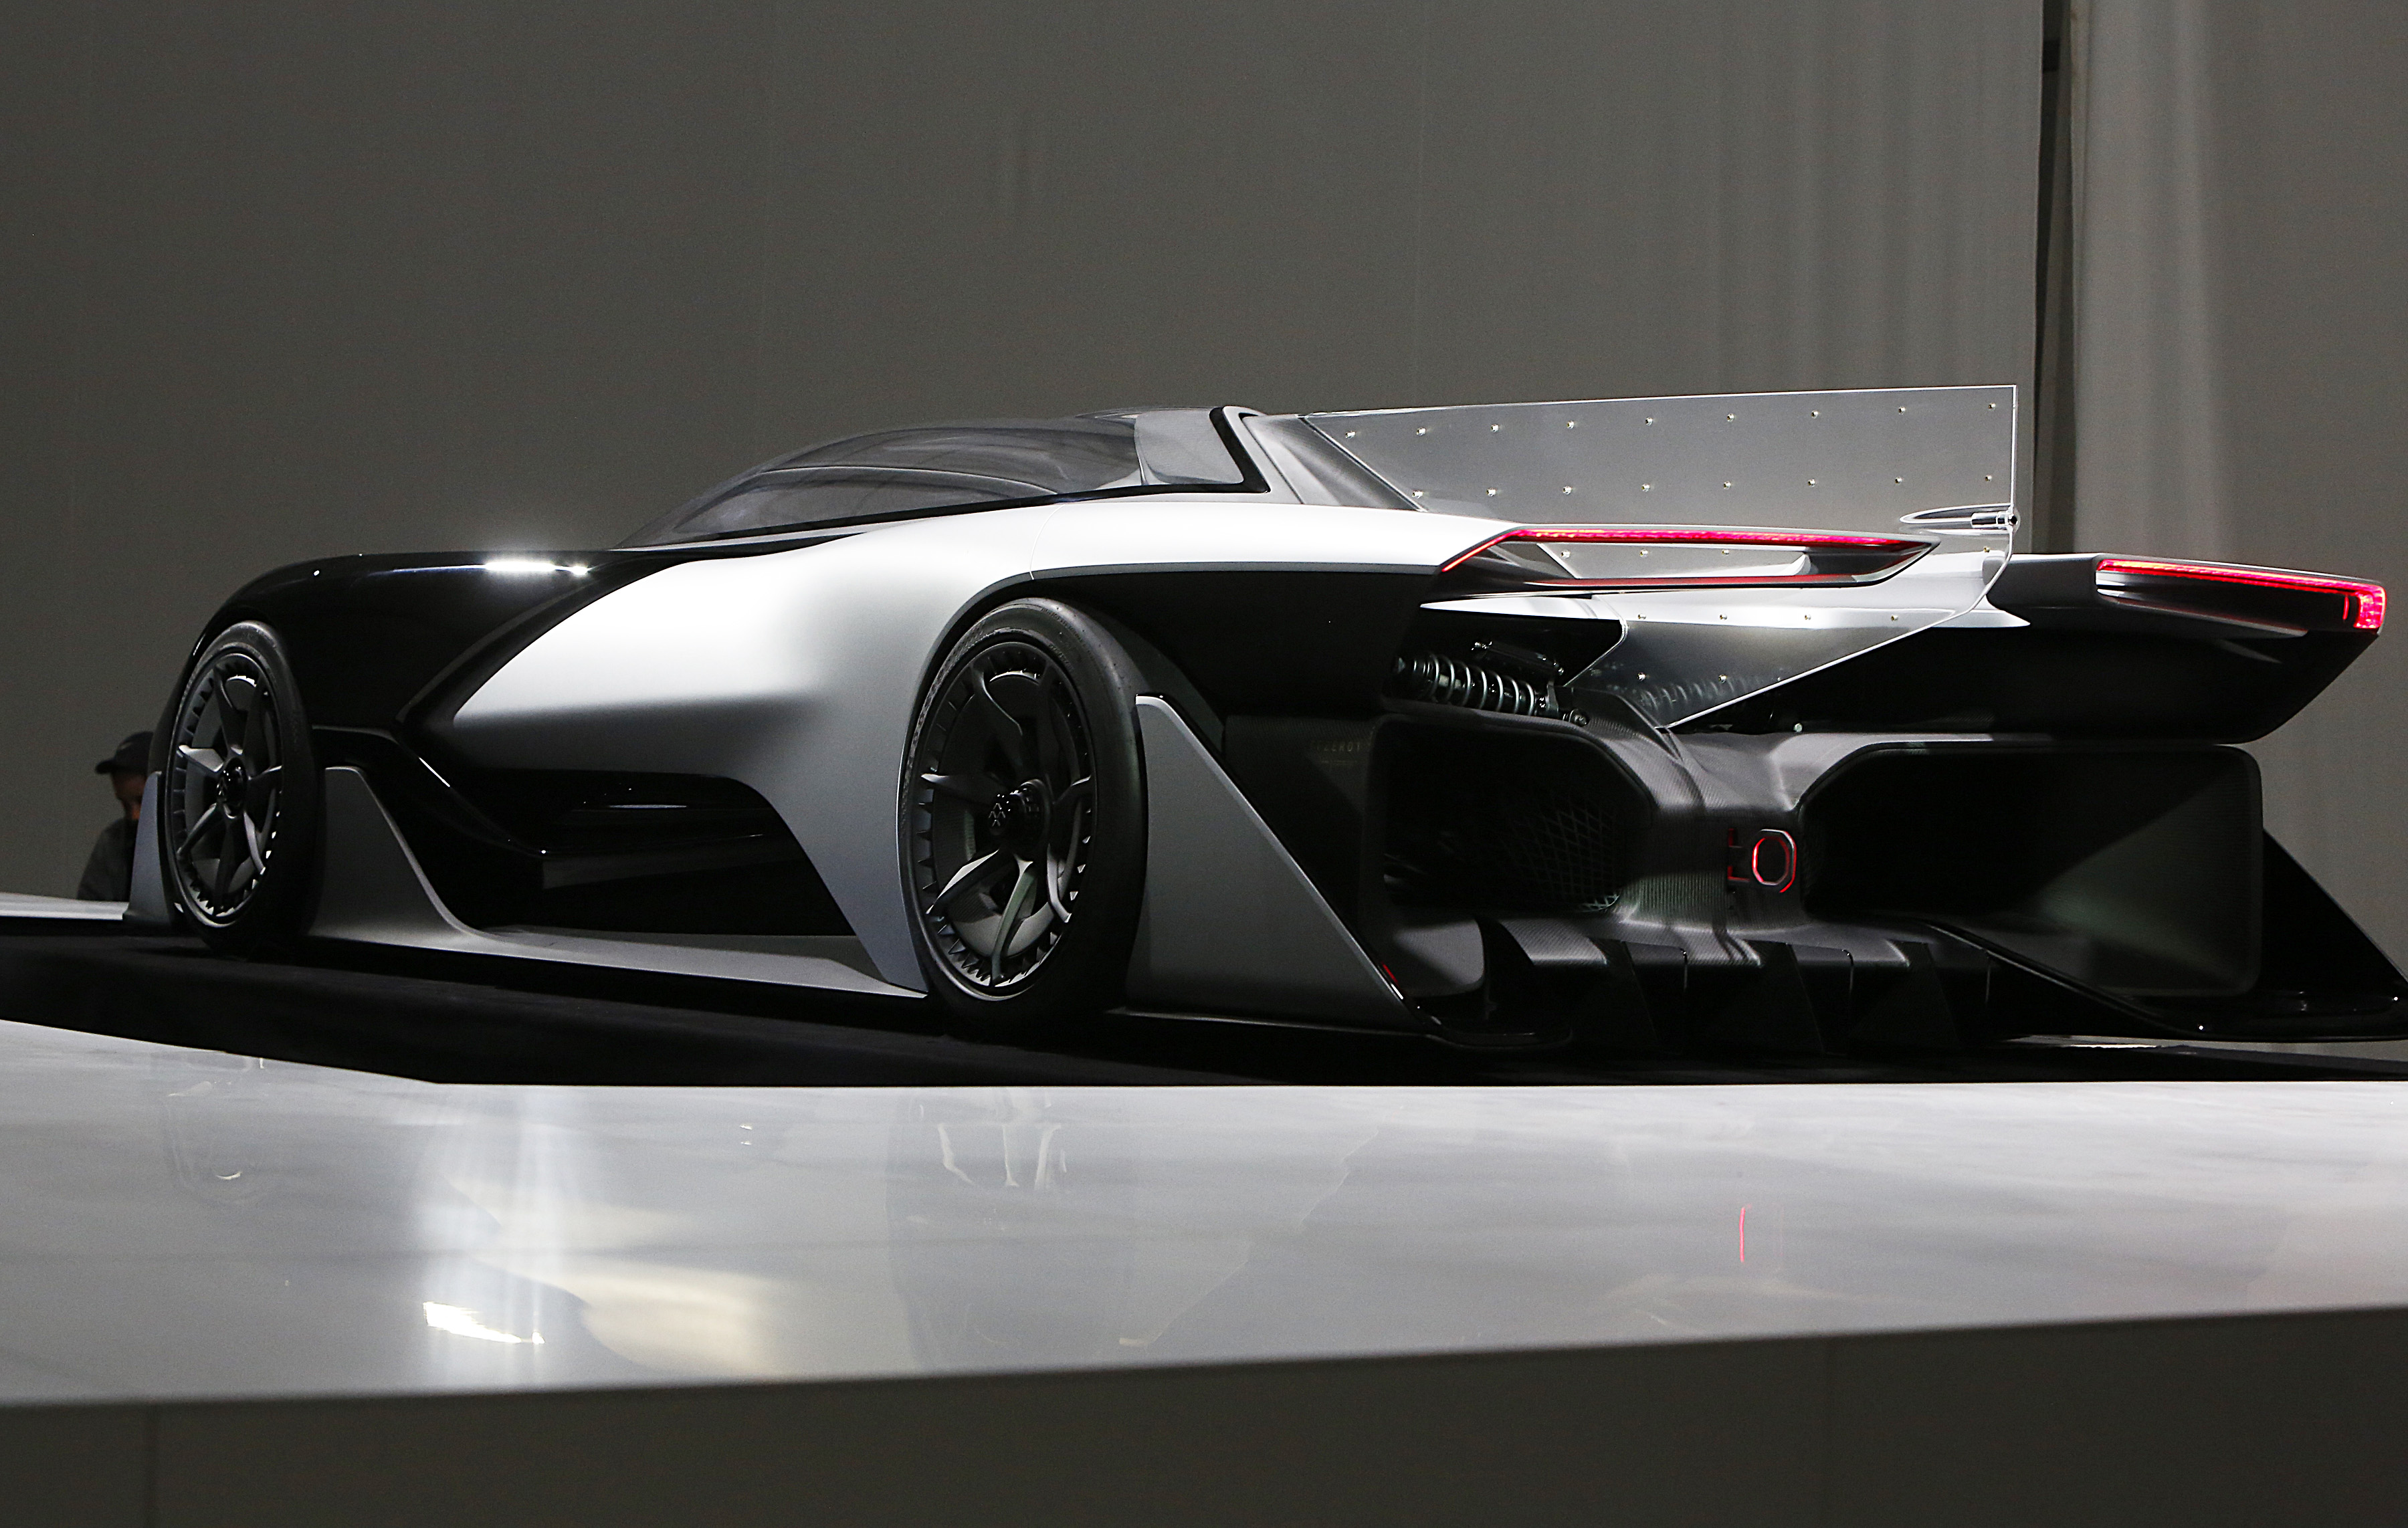 IMAGE DISTRIBUTED FOR FARADAY FUTURE - Faraday Future (FF) FFZERO1 Concept vehicle at FF's pre-CES reveal event in Las Vegas on Monday, Jan. 4, 2016. (Bizuayehu Tesfaye/ AP Images for Faraday Future)